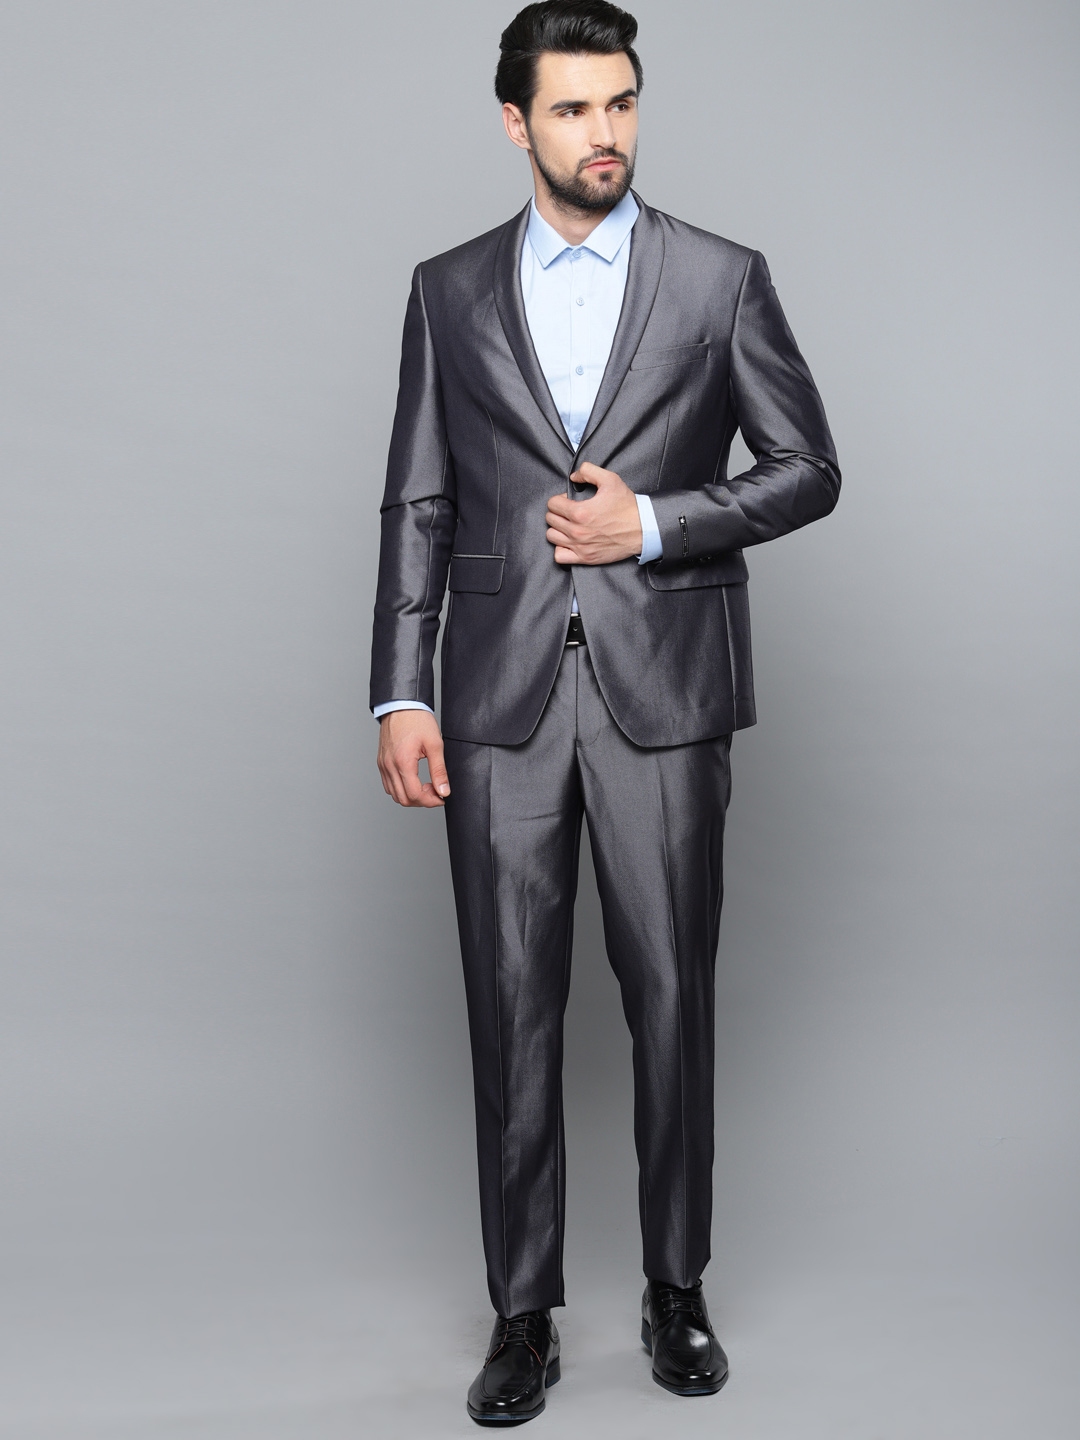 36% OFF on Louis Philippe Men Grey Solid Single-Breasted Slim Fit Formal  Suit on Myntra